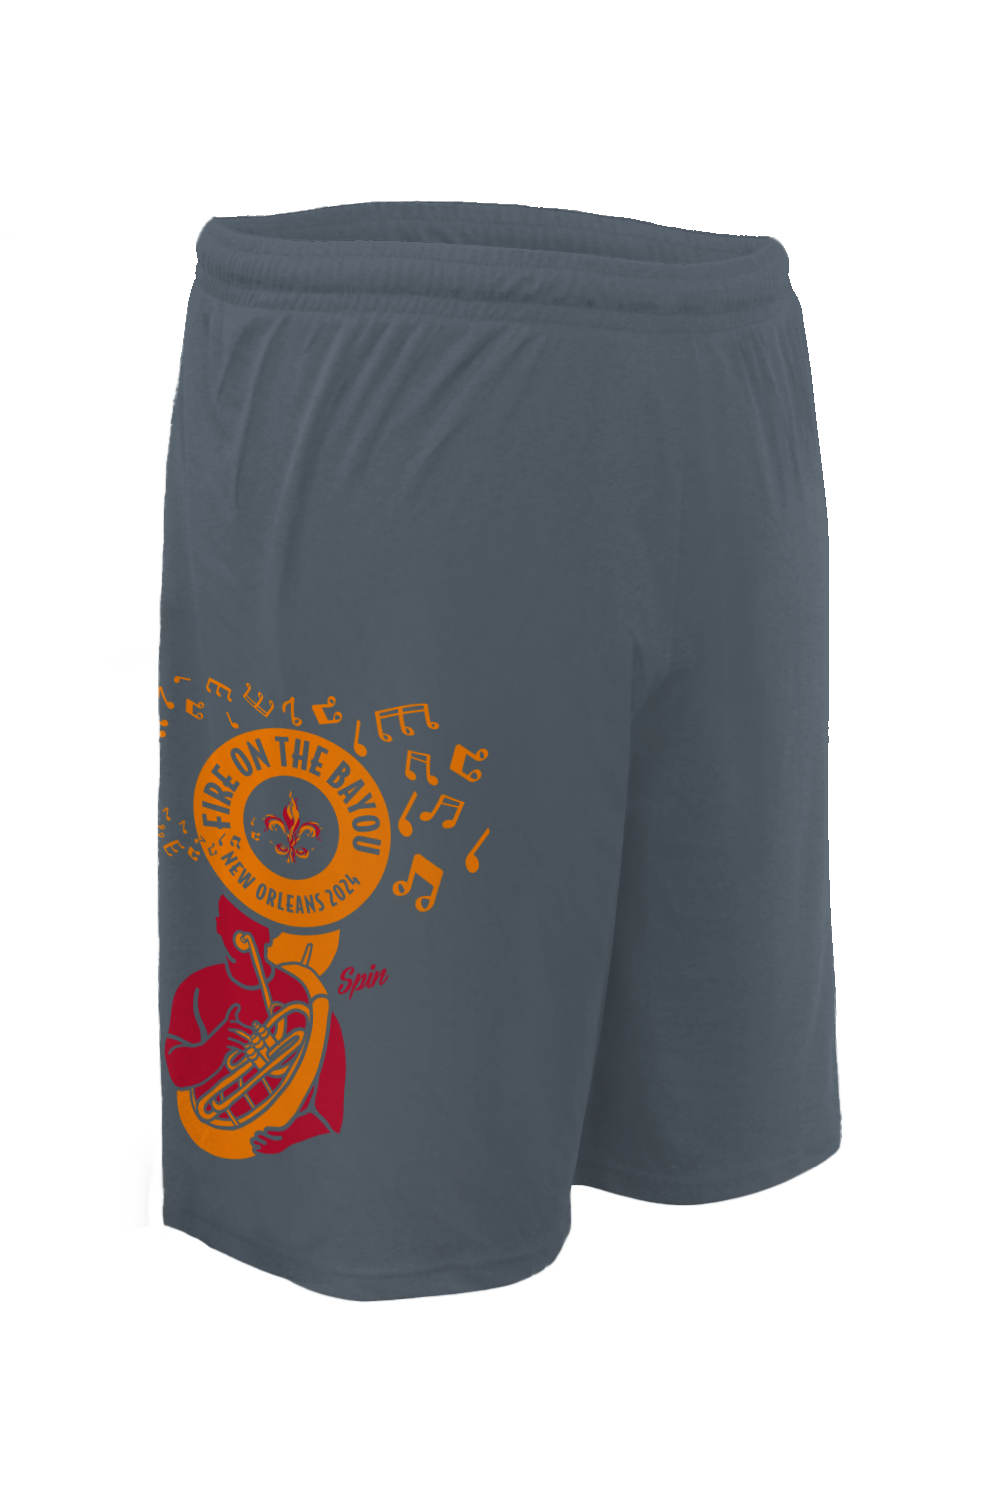 Fire on the Bayou 2024 Micro Shorts (Charcoal)